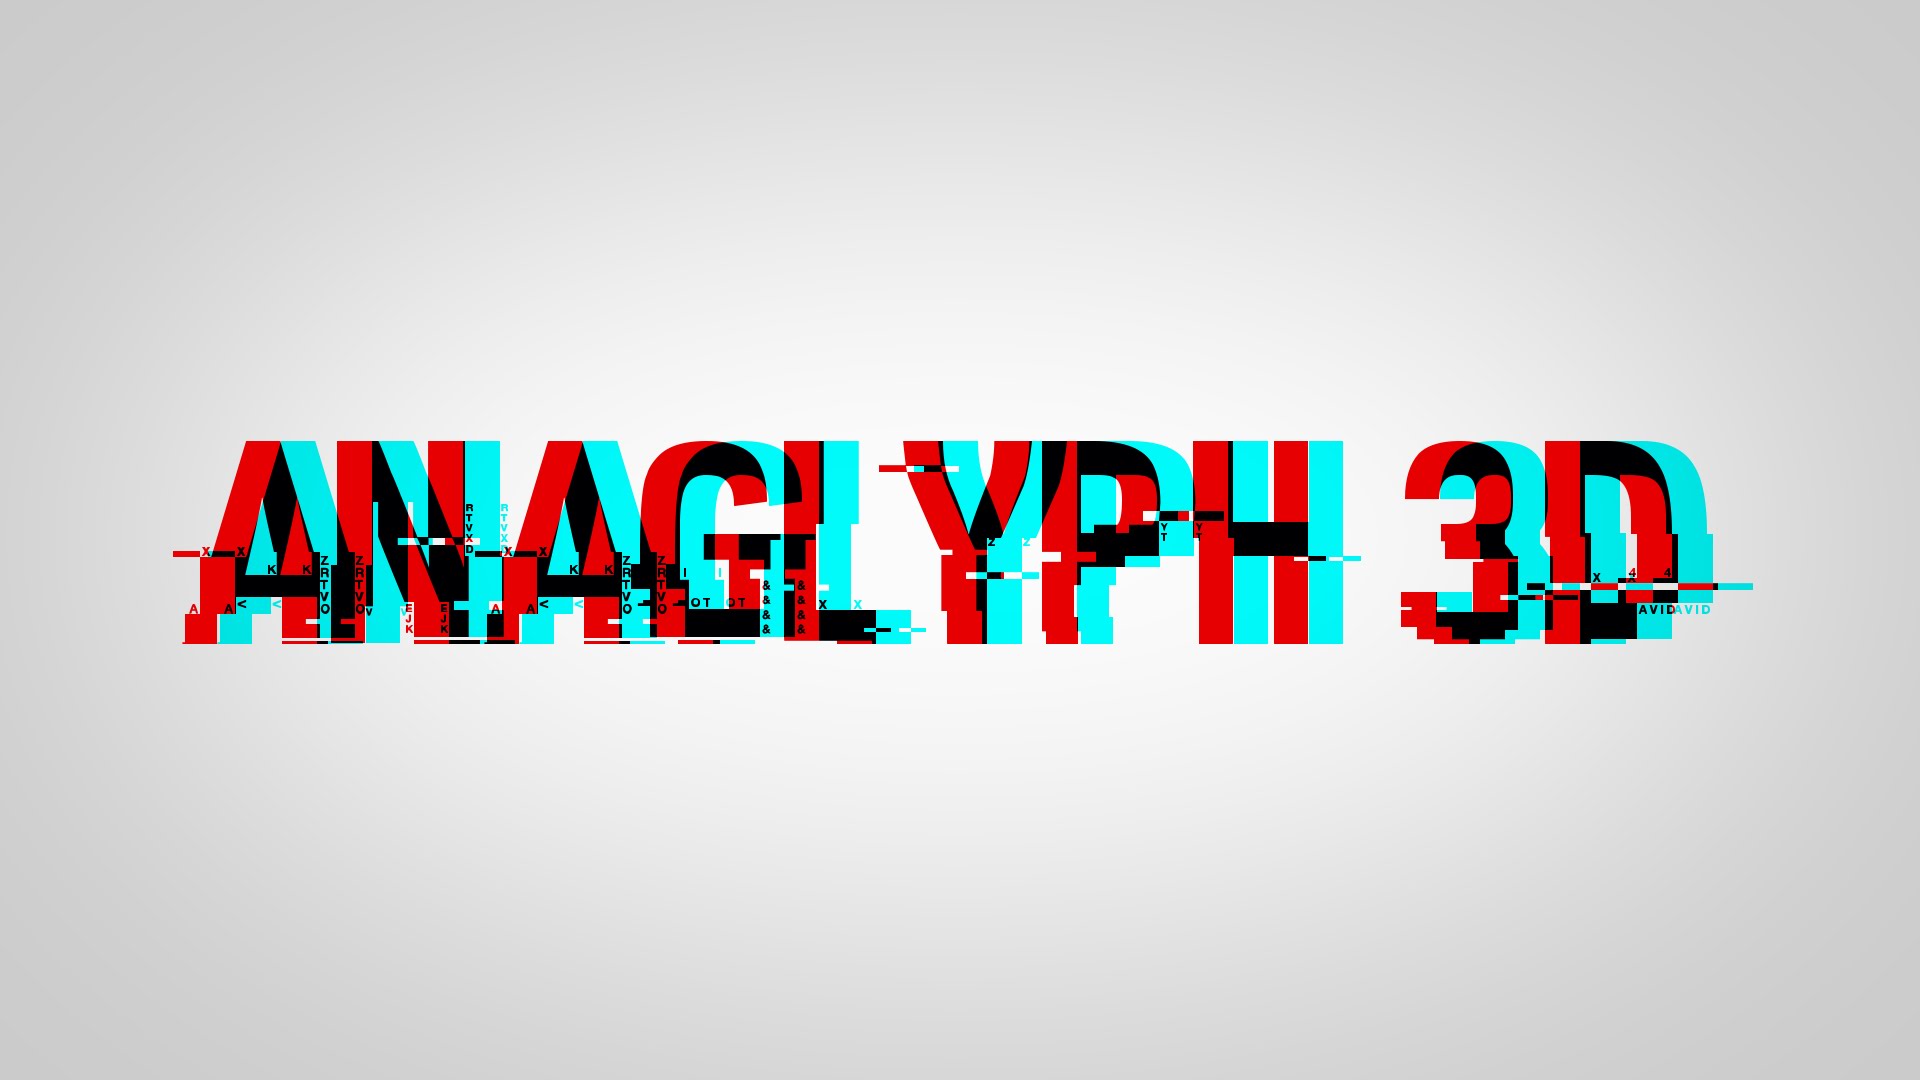 How to Make ANAGLYPH 3D Text - YouTube